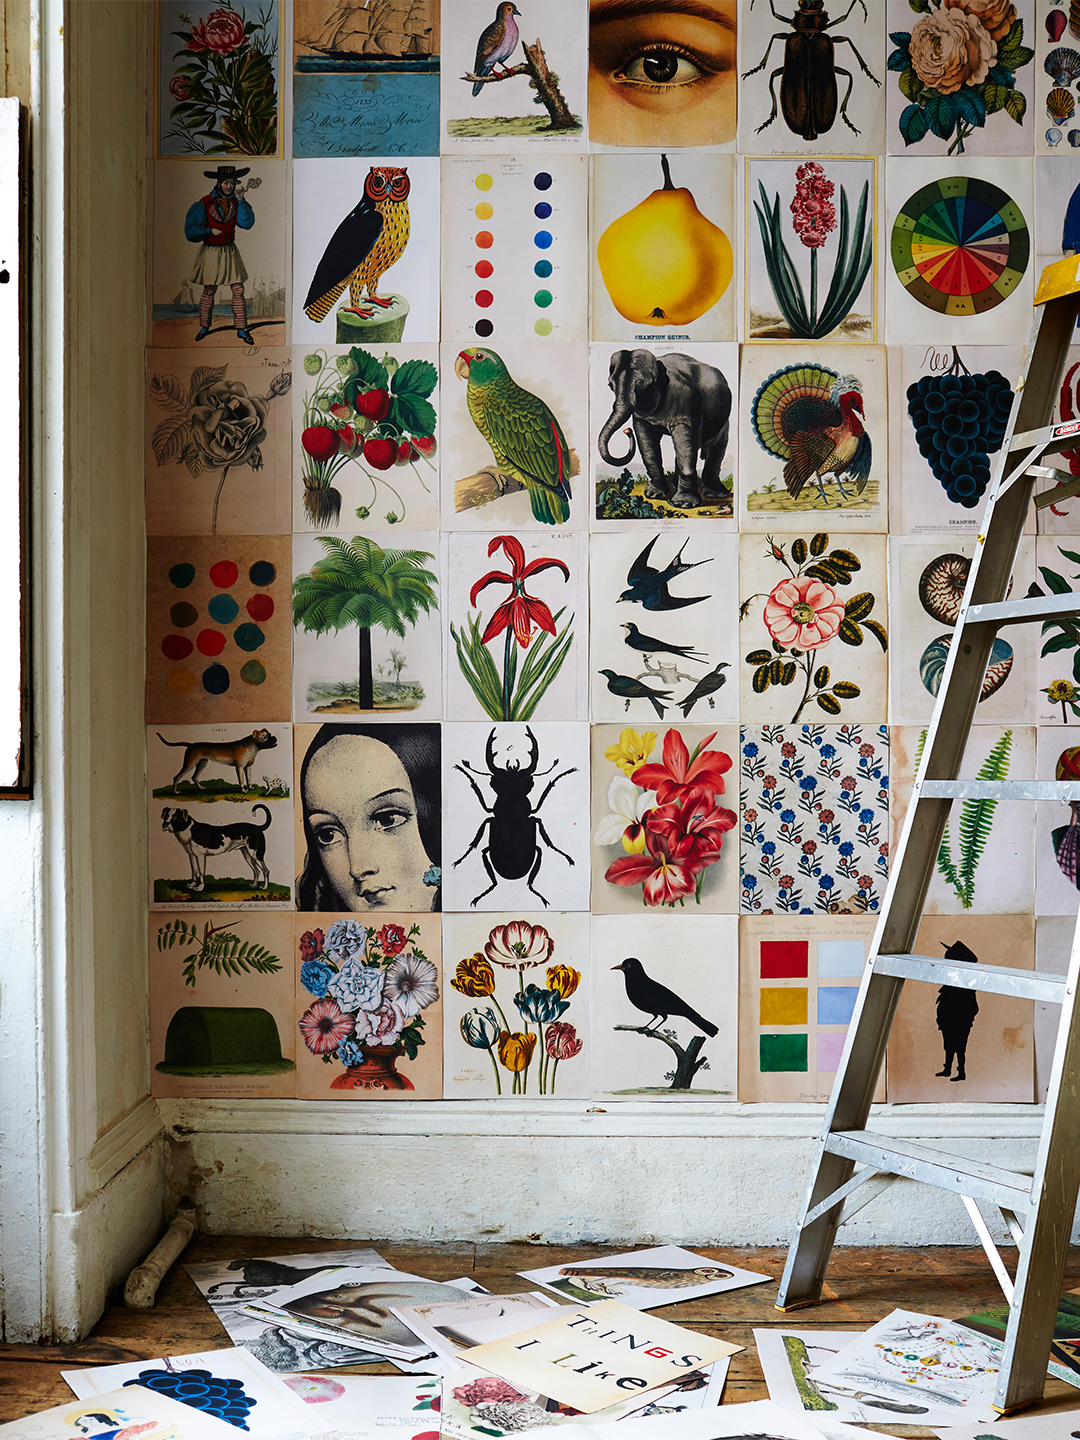 John derian book pages on wall